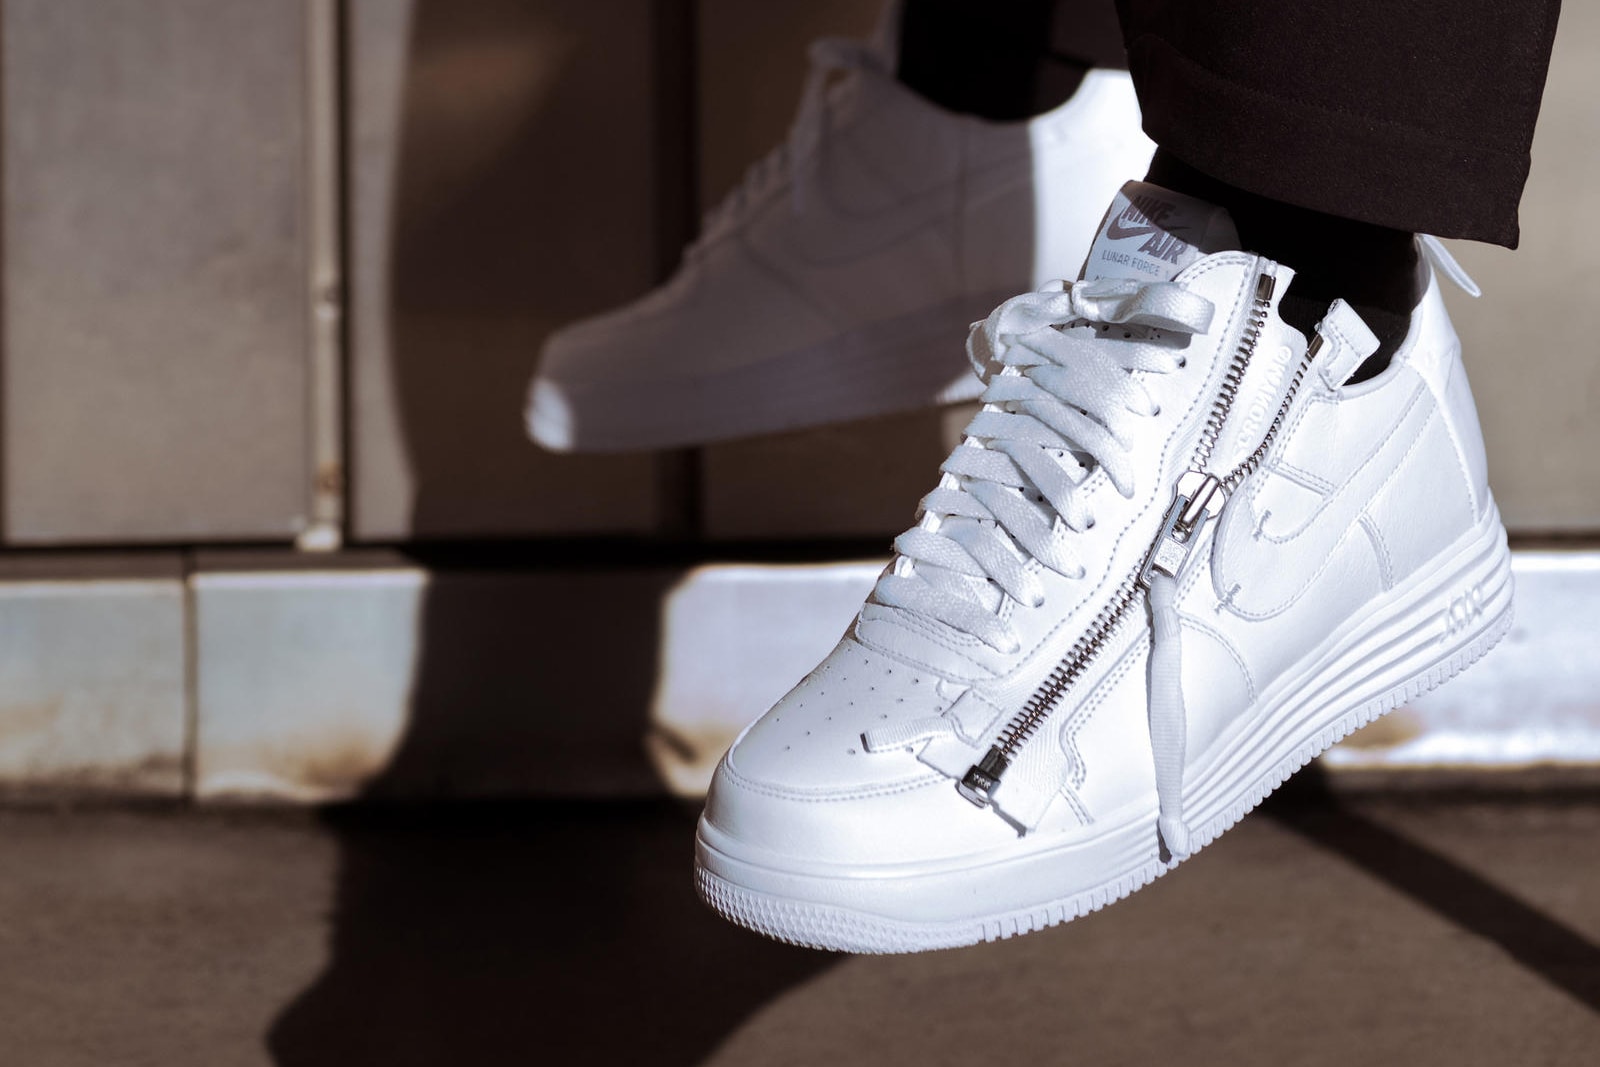 Nike Air Force 1 High 'Sculpt': The canvas for self expression